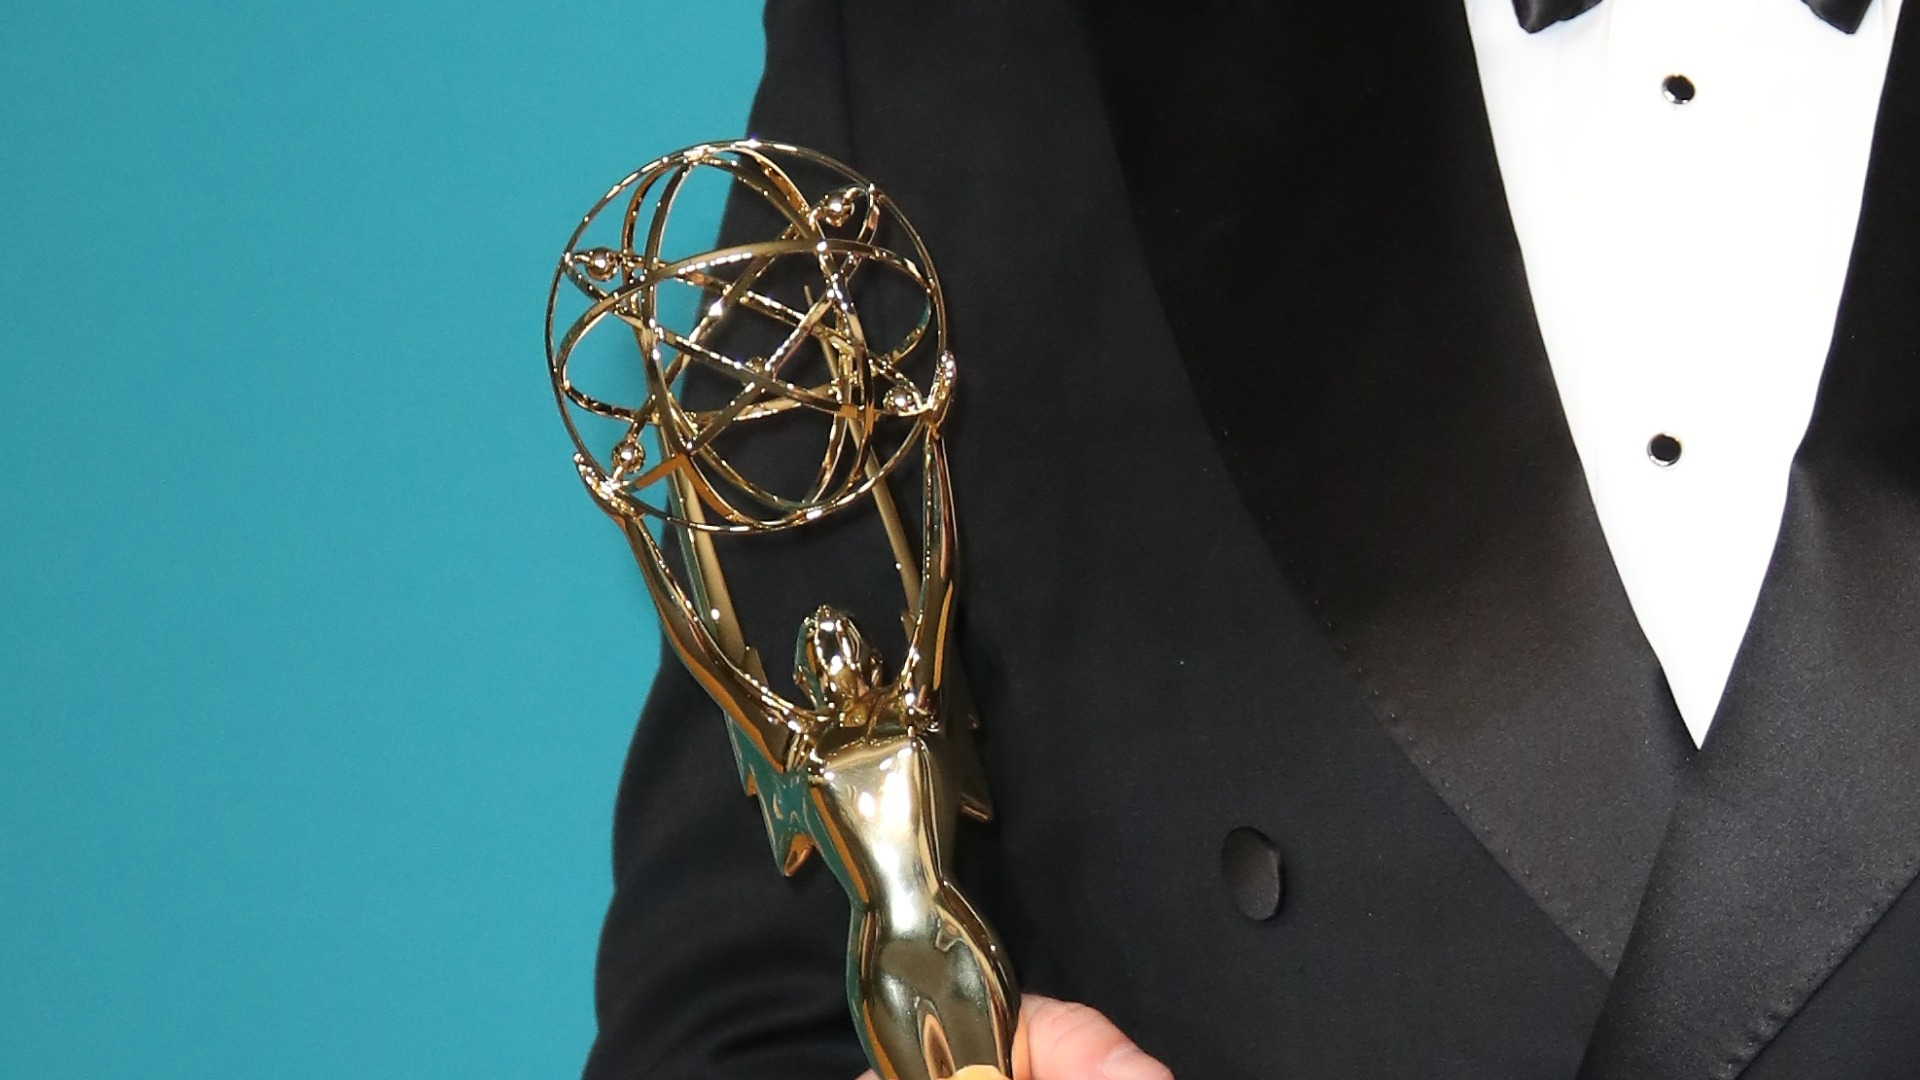 NESN Wins Five New England Emmy Awards, Most Of Any Sports Network In
Region